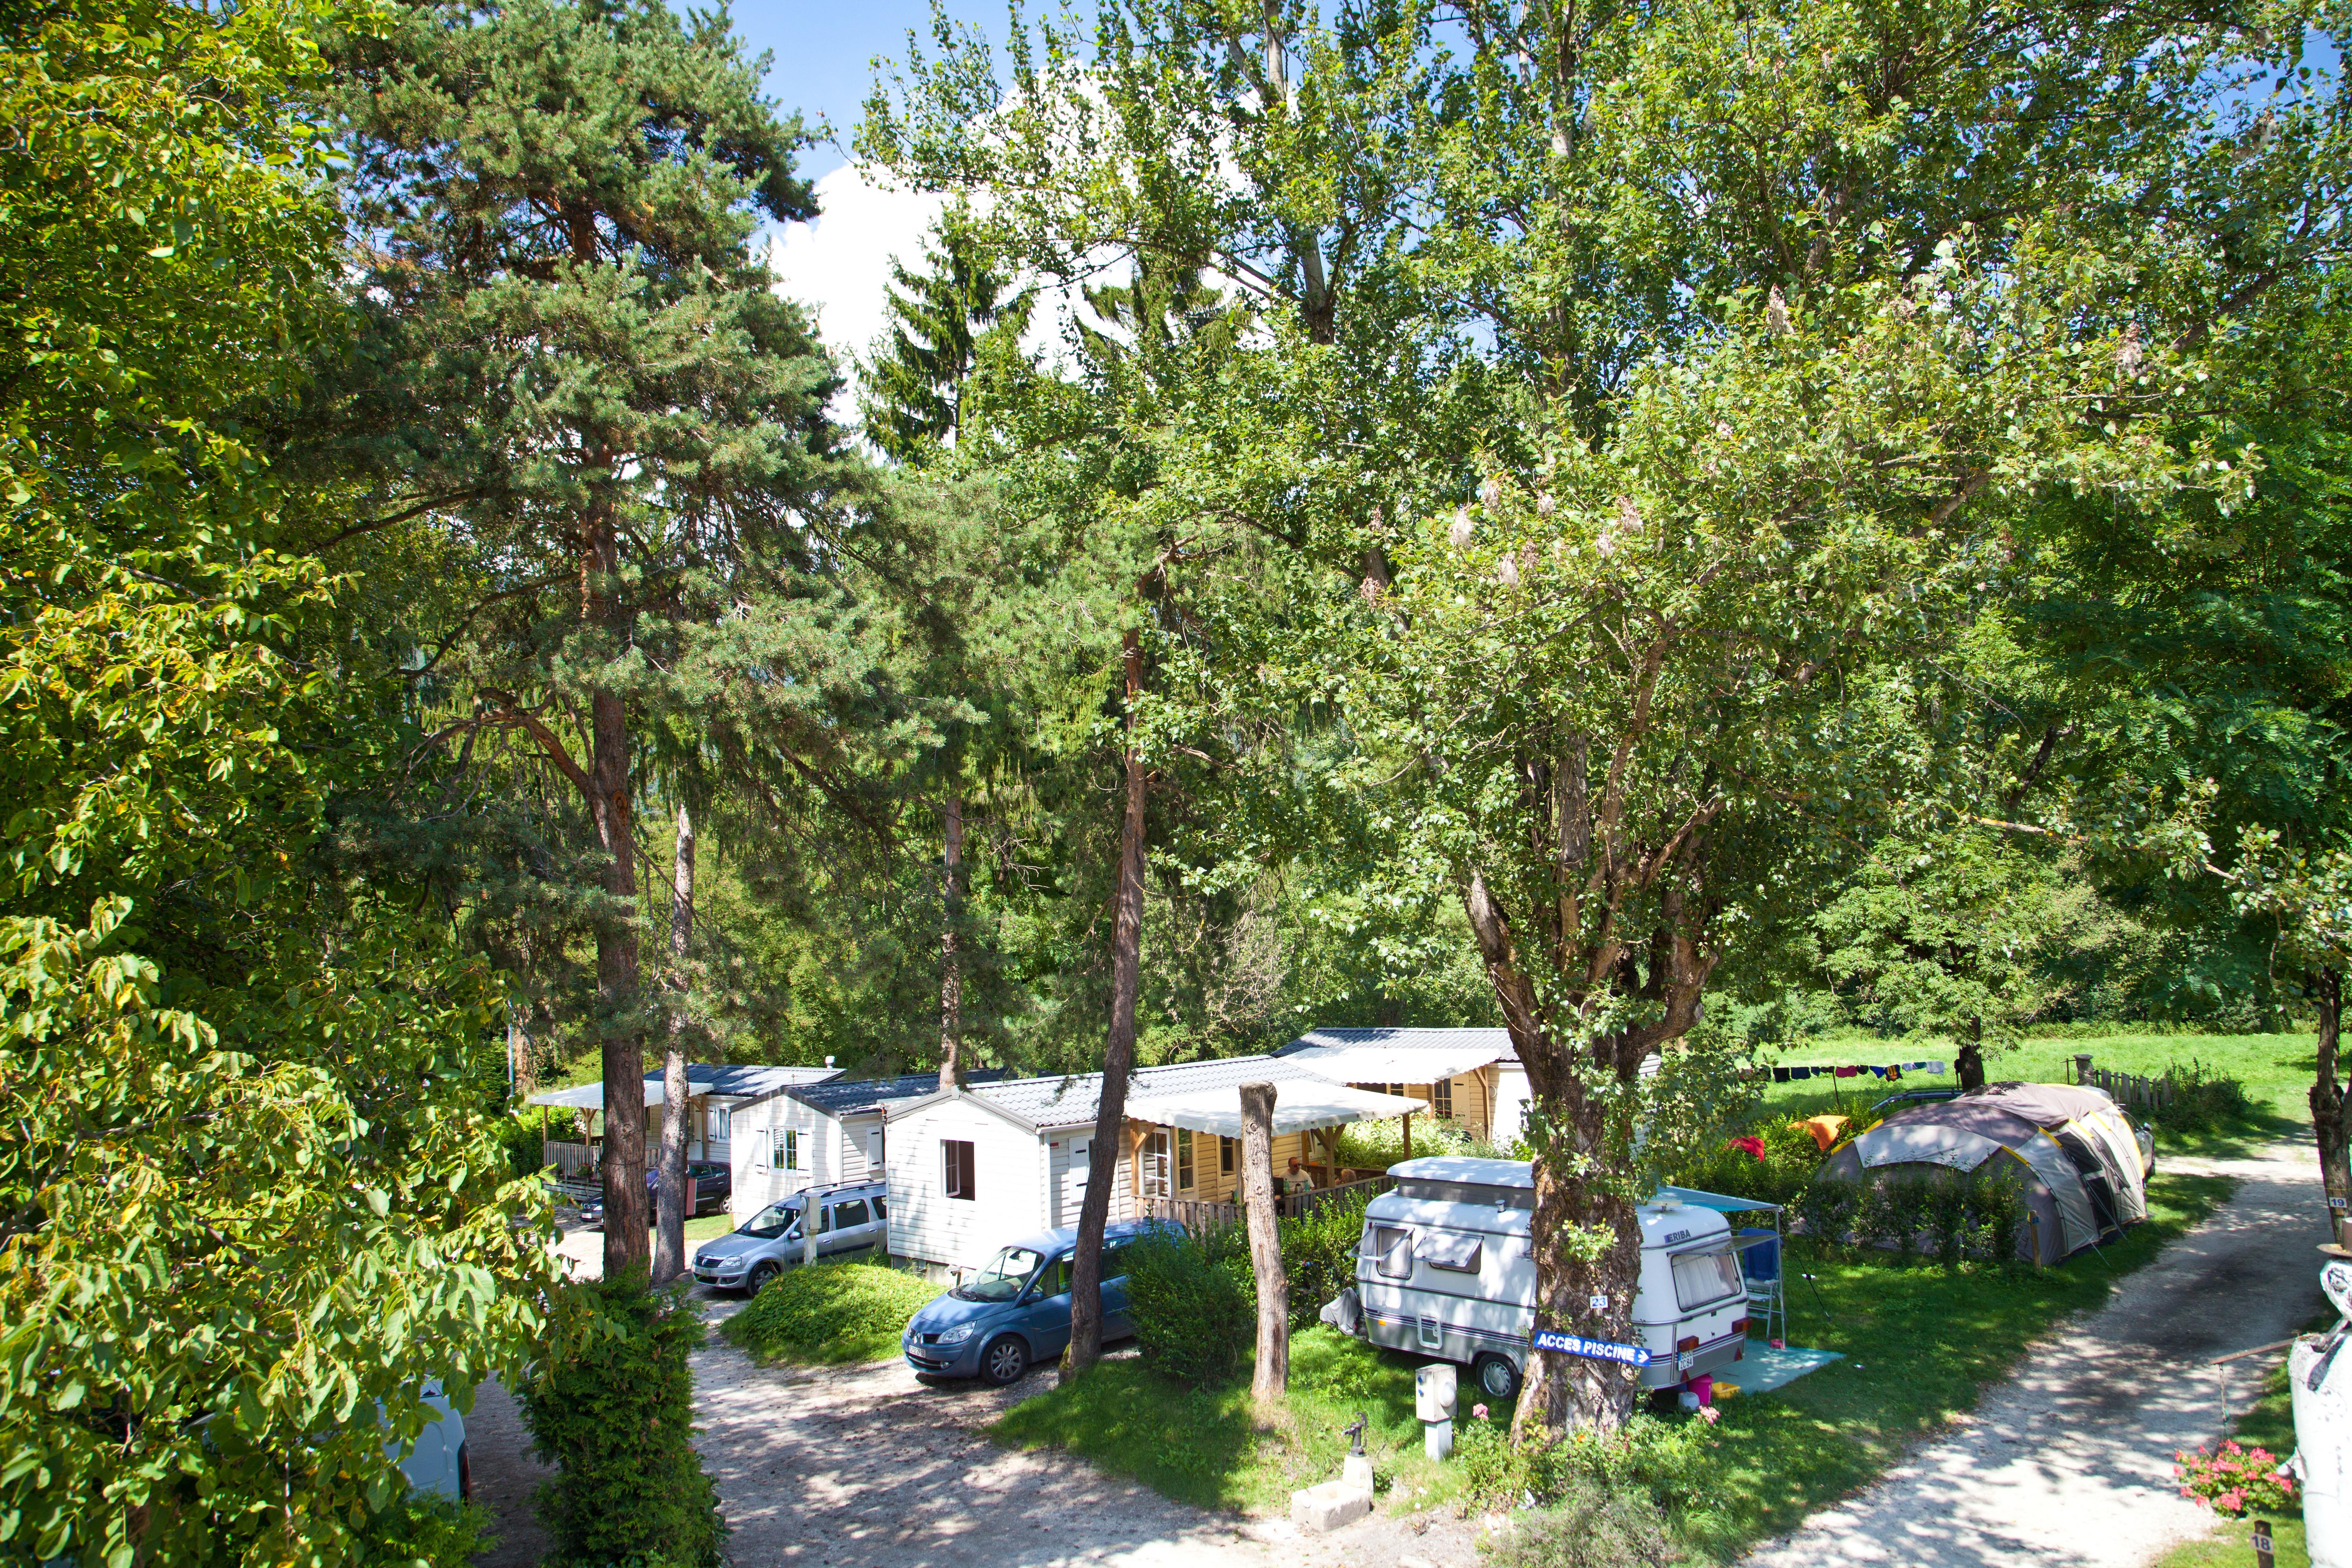 Pitch - Pitch With Car + Tent / Caravan  (Without Electricity) - Camping des Neiges